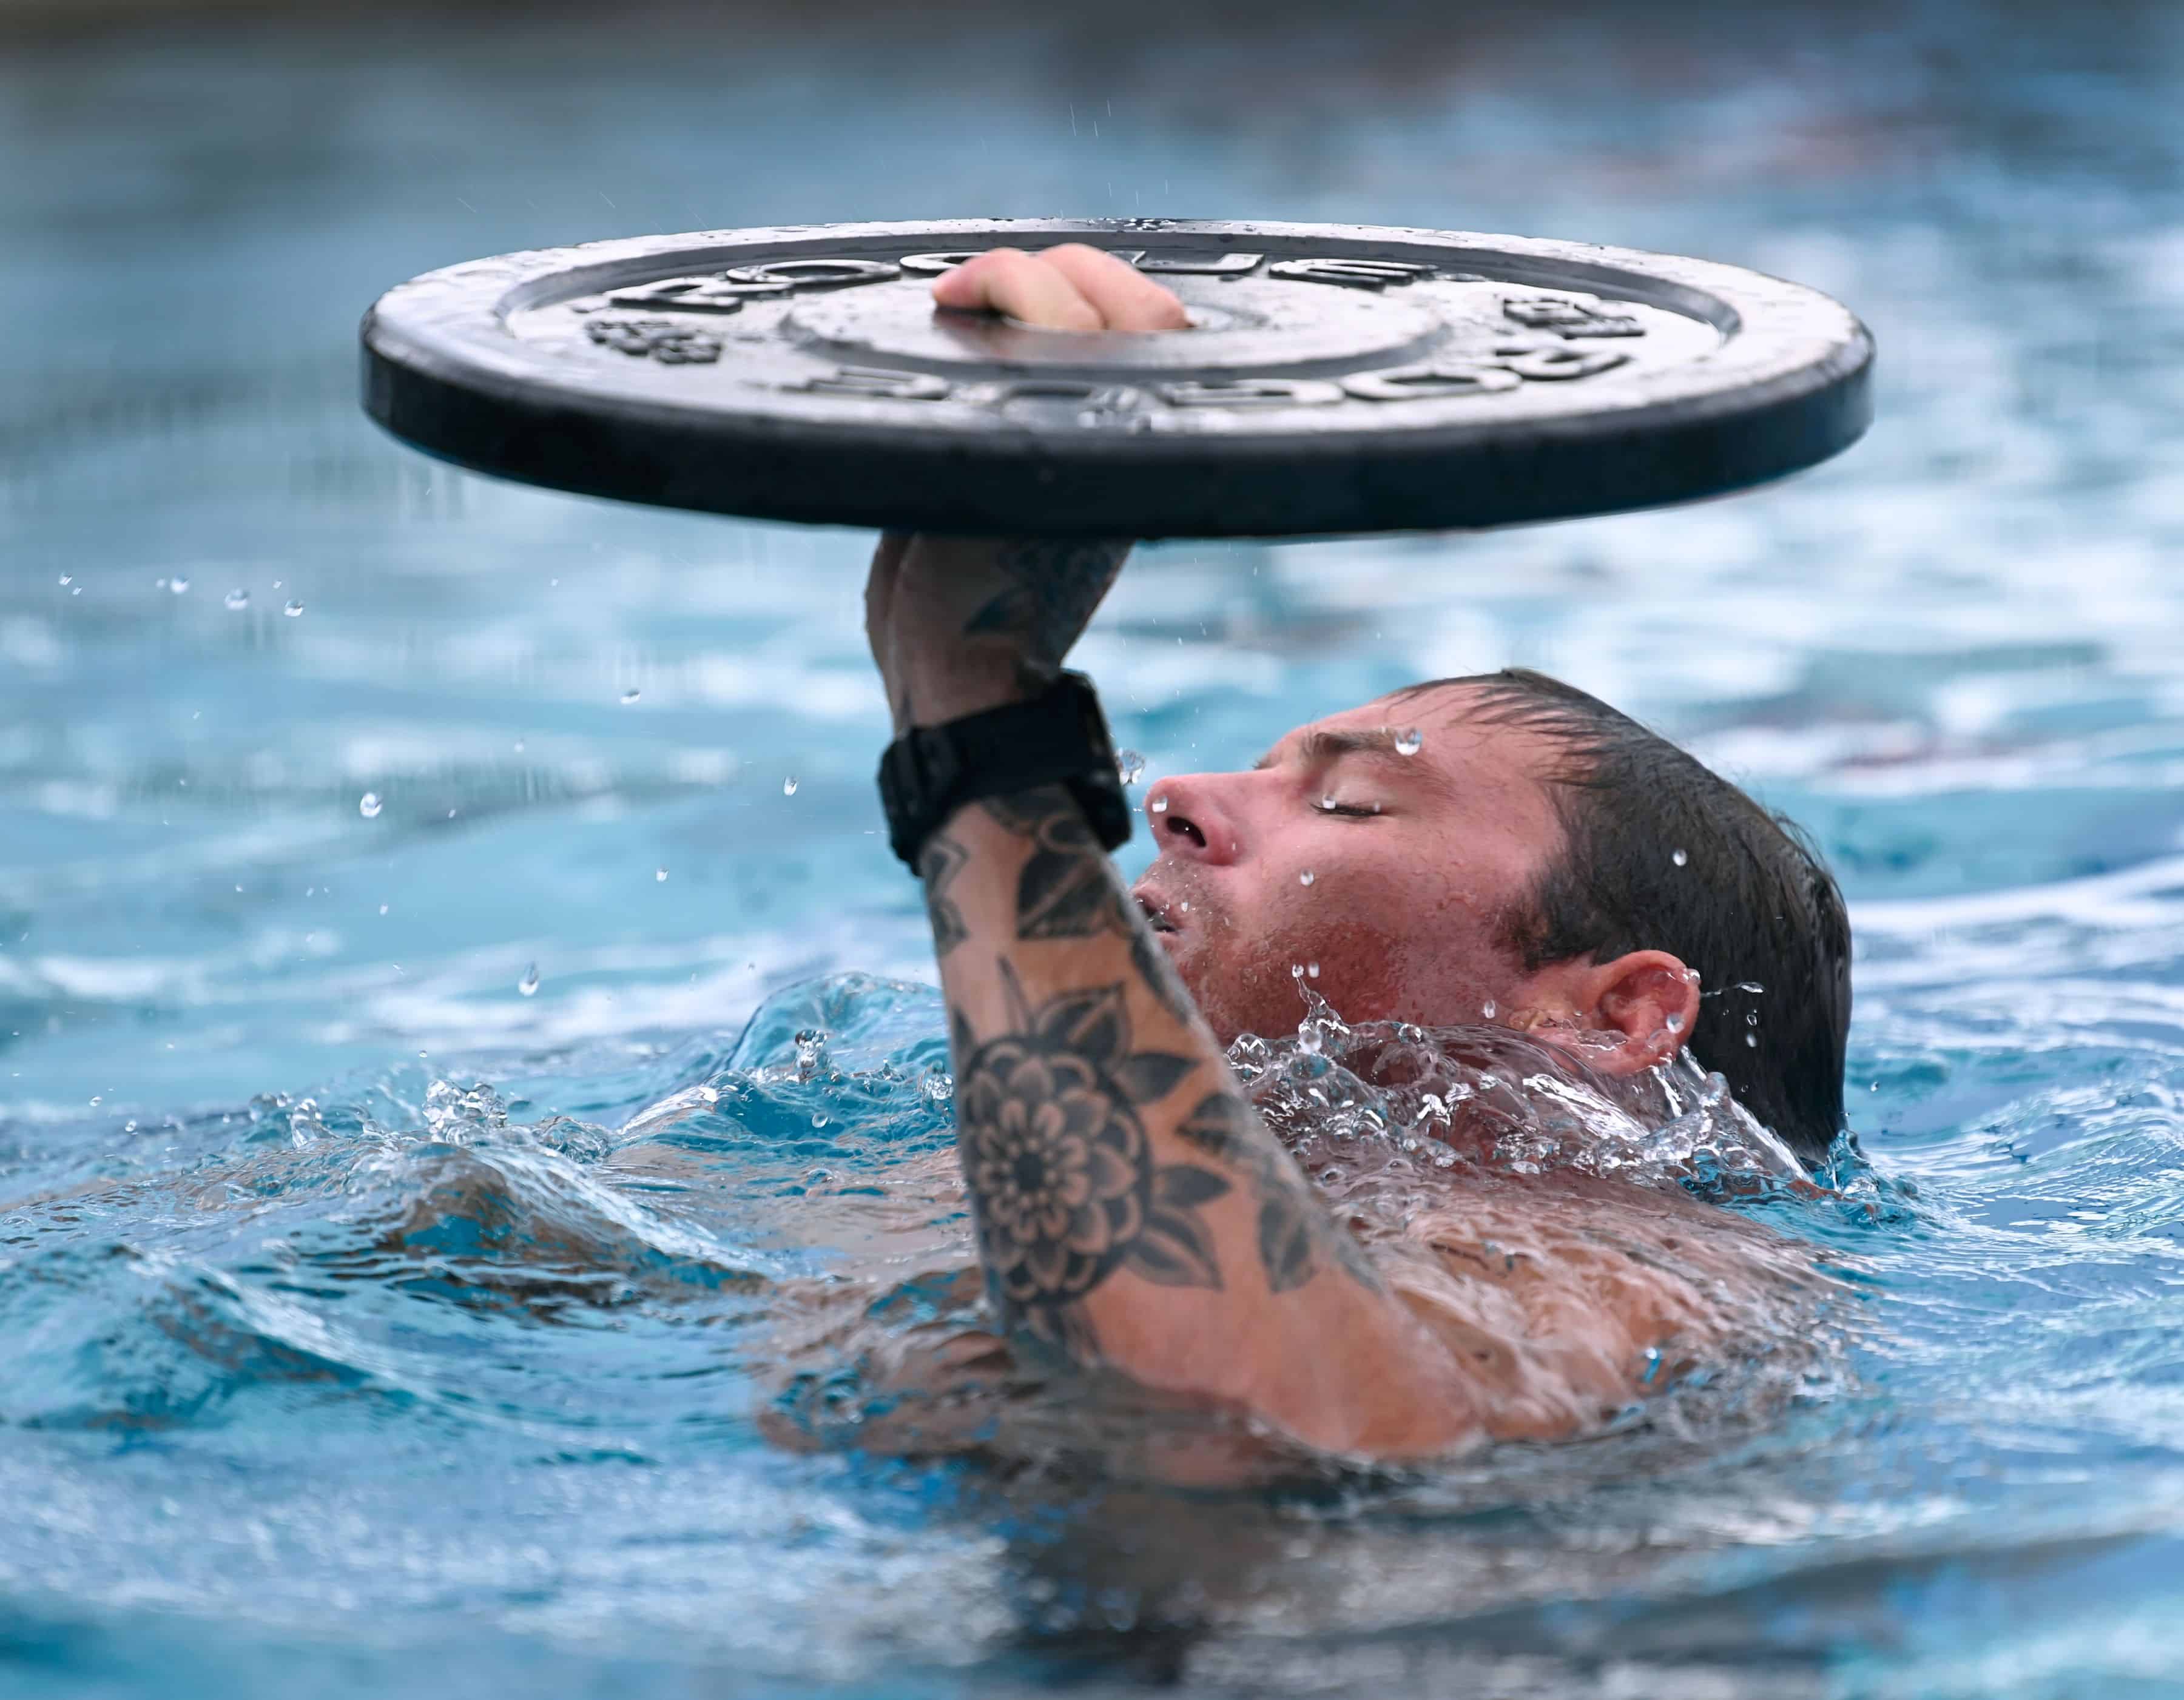 A competitor in the 2023 U.S. Army Special Operations Command (USASOC) Best Dive Team Competition treads water while keeping a 15-pound weight above his head at the U.S. Army John F. Kennedy Special Warfare Center and School's Special Forces Underwater Operations School at NAS Key West, Florida Sept. 26, 2023.